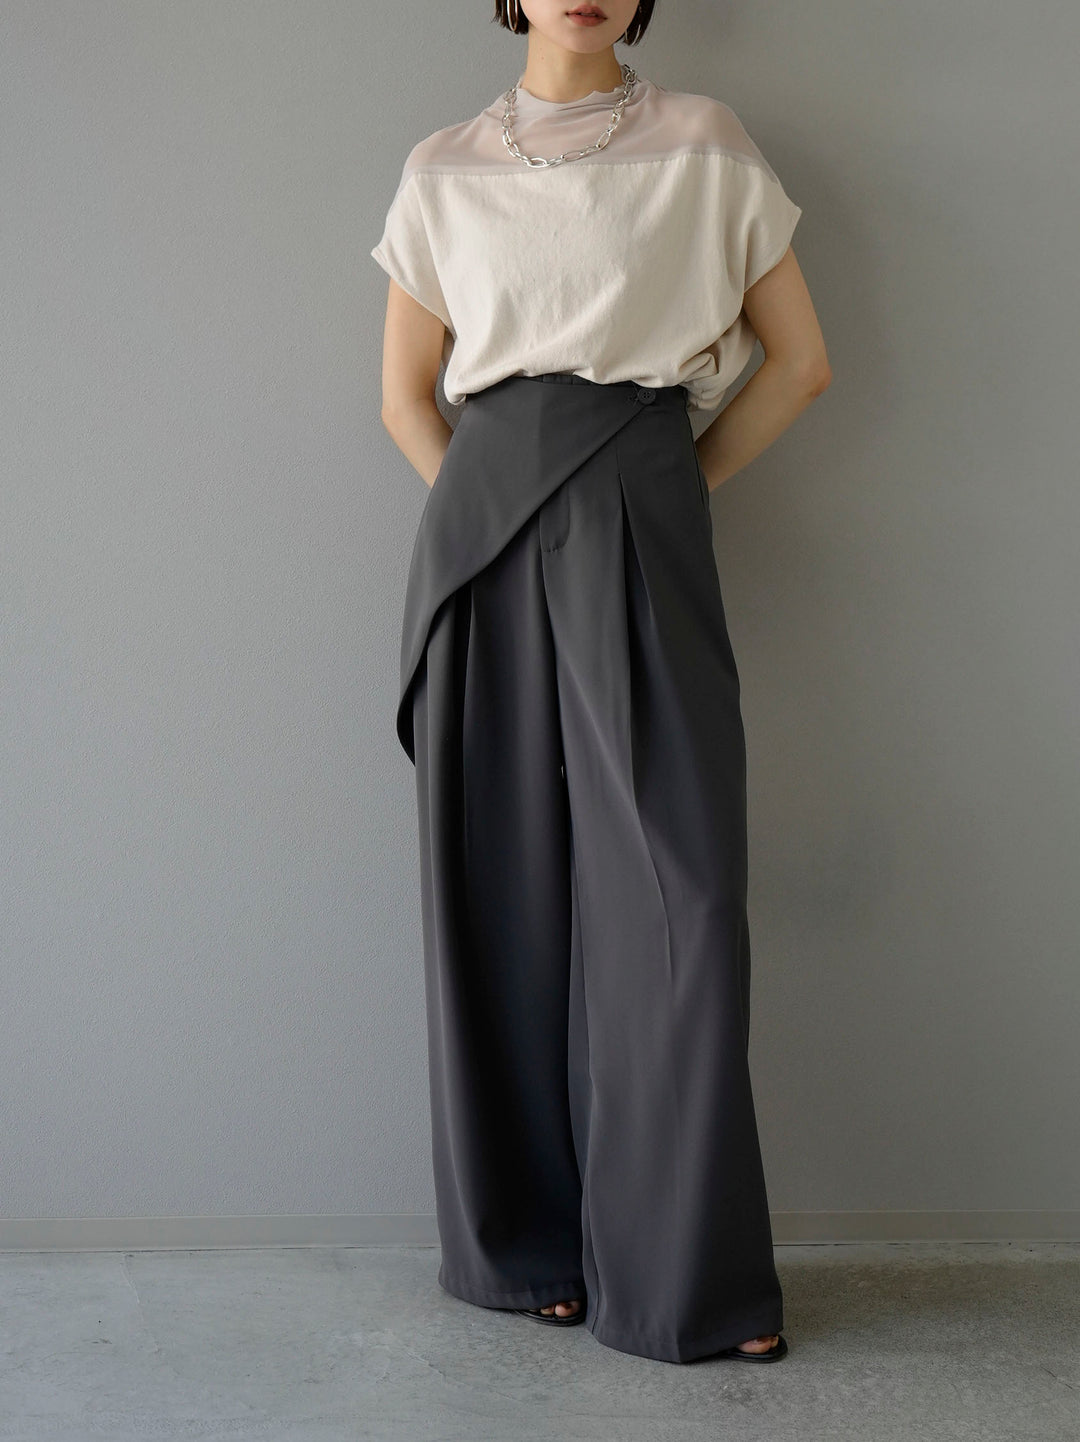 [Mix and match set] [SET] French sleeve sheer knit pullover + willow sheer mellow half sleeve top + wrap wide pants (3 sets)